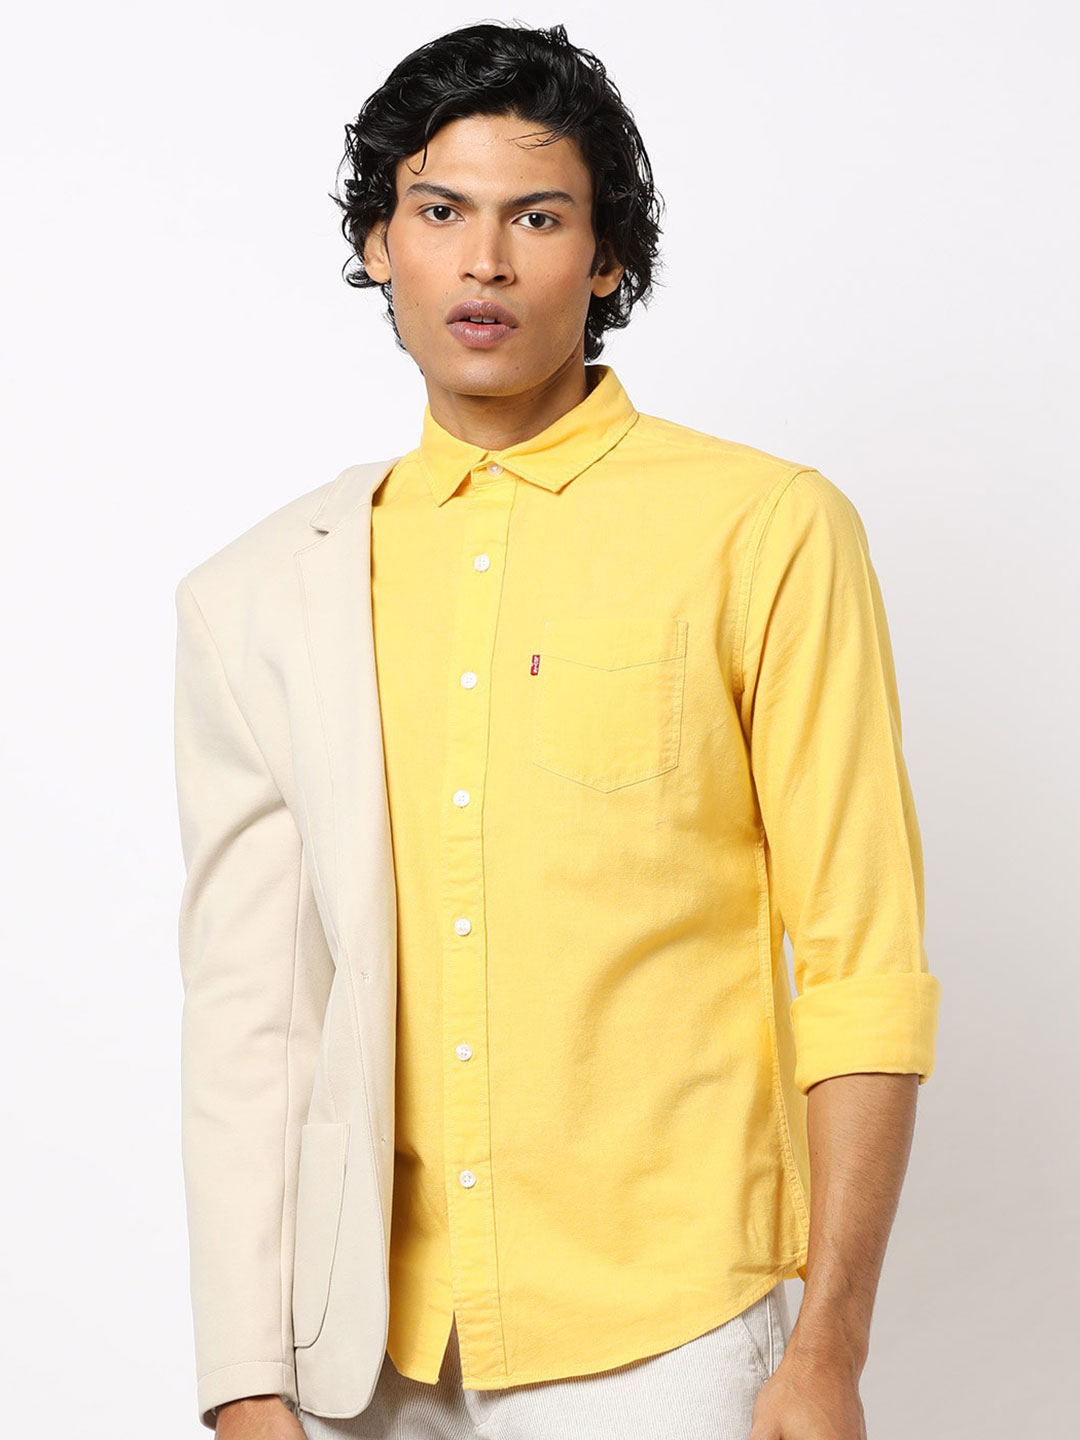 Levis yellow casual wear solid shirt 